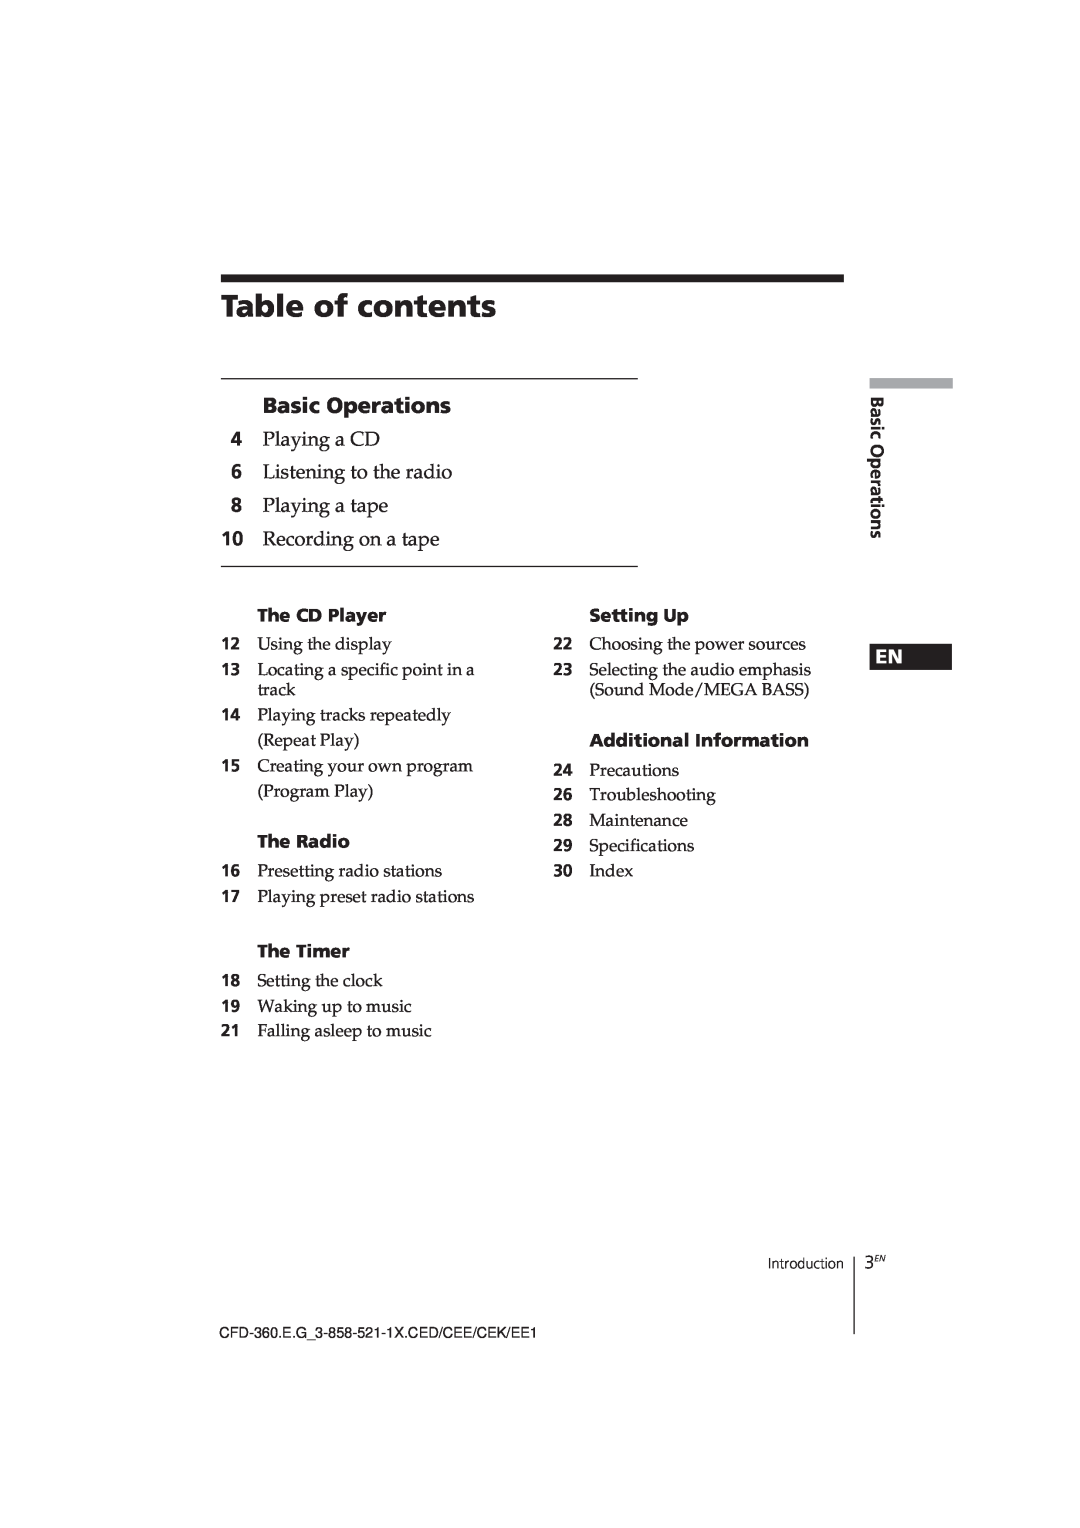 Sony CFD-360 operating instructions Table of contents, Basic Operations, 4Playing a CD 6Listening to the radio 